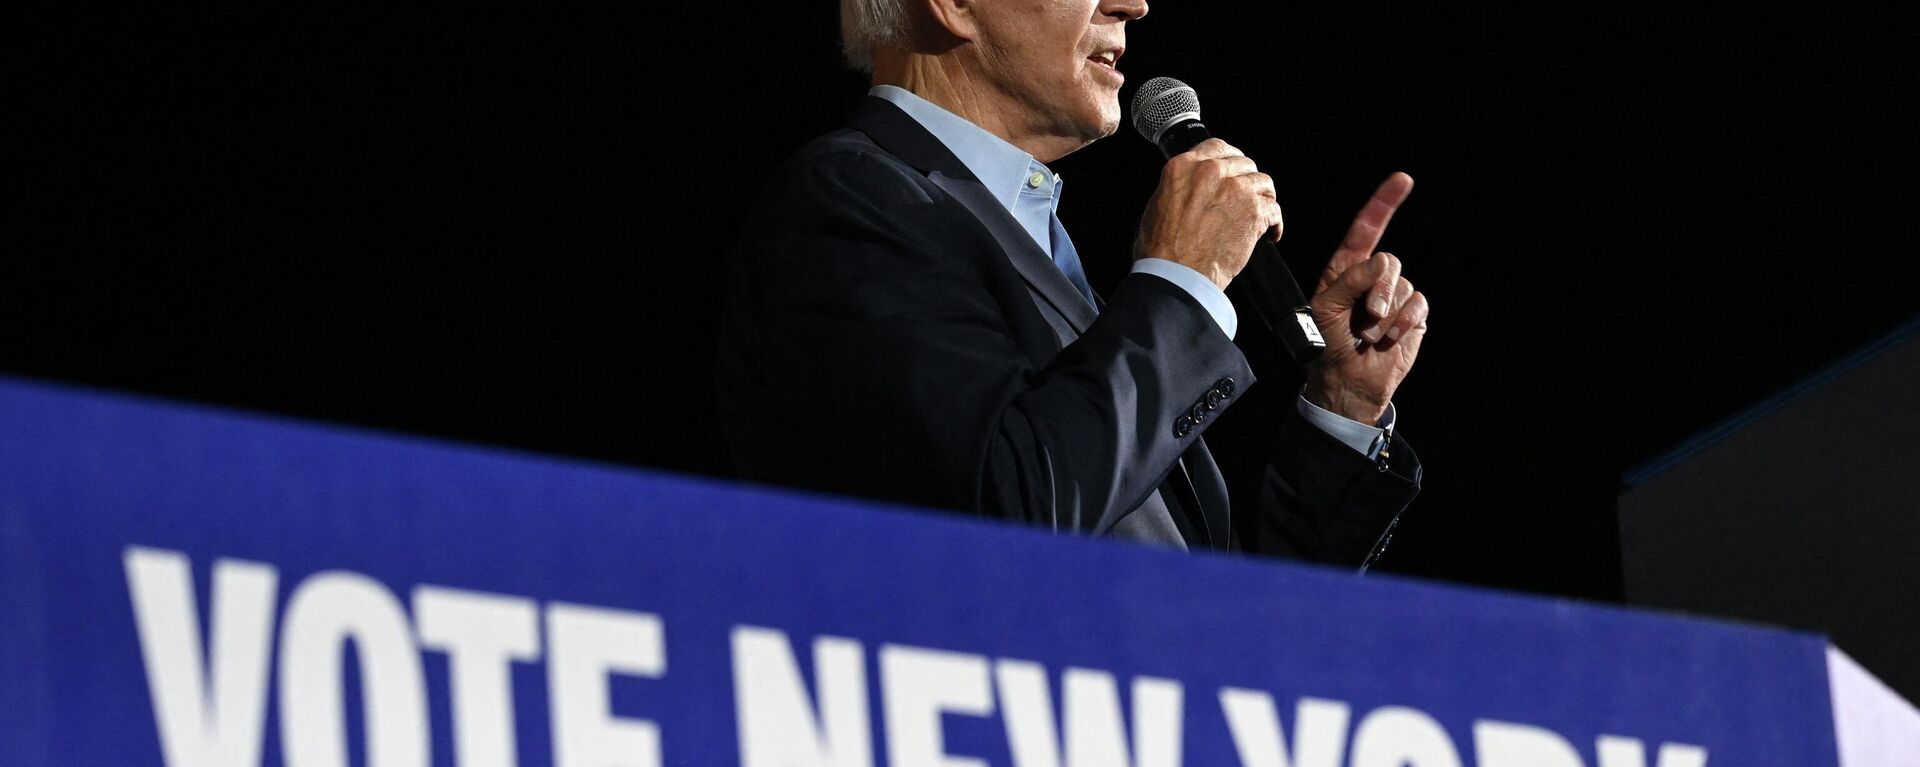 US President Joe Biden speaks during a rally for Democratic candidates, including New York Governor Kathy Hochul, at Sarah Lawrence College in Bronxville, New York, on November 6, 2022 - Sputnik International, 1920, 07.11.2022